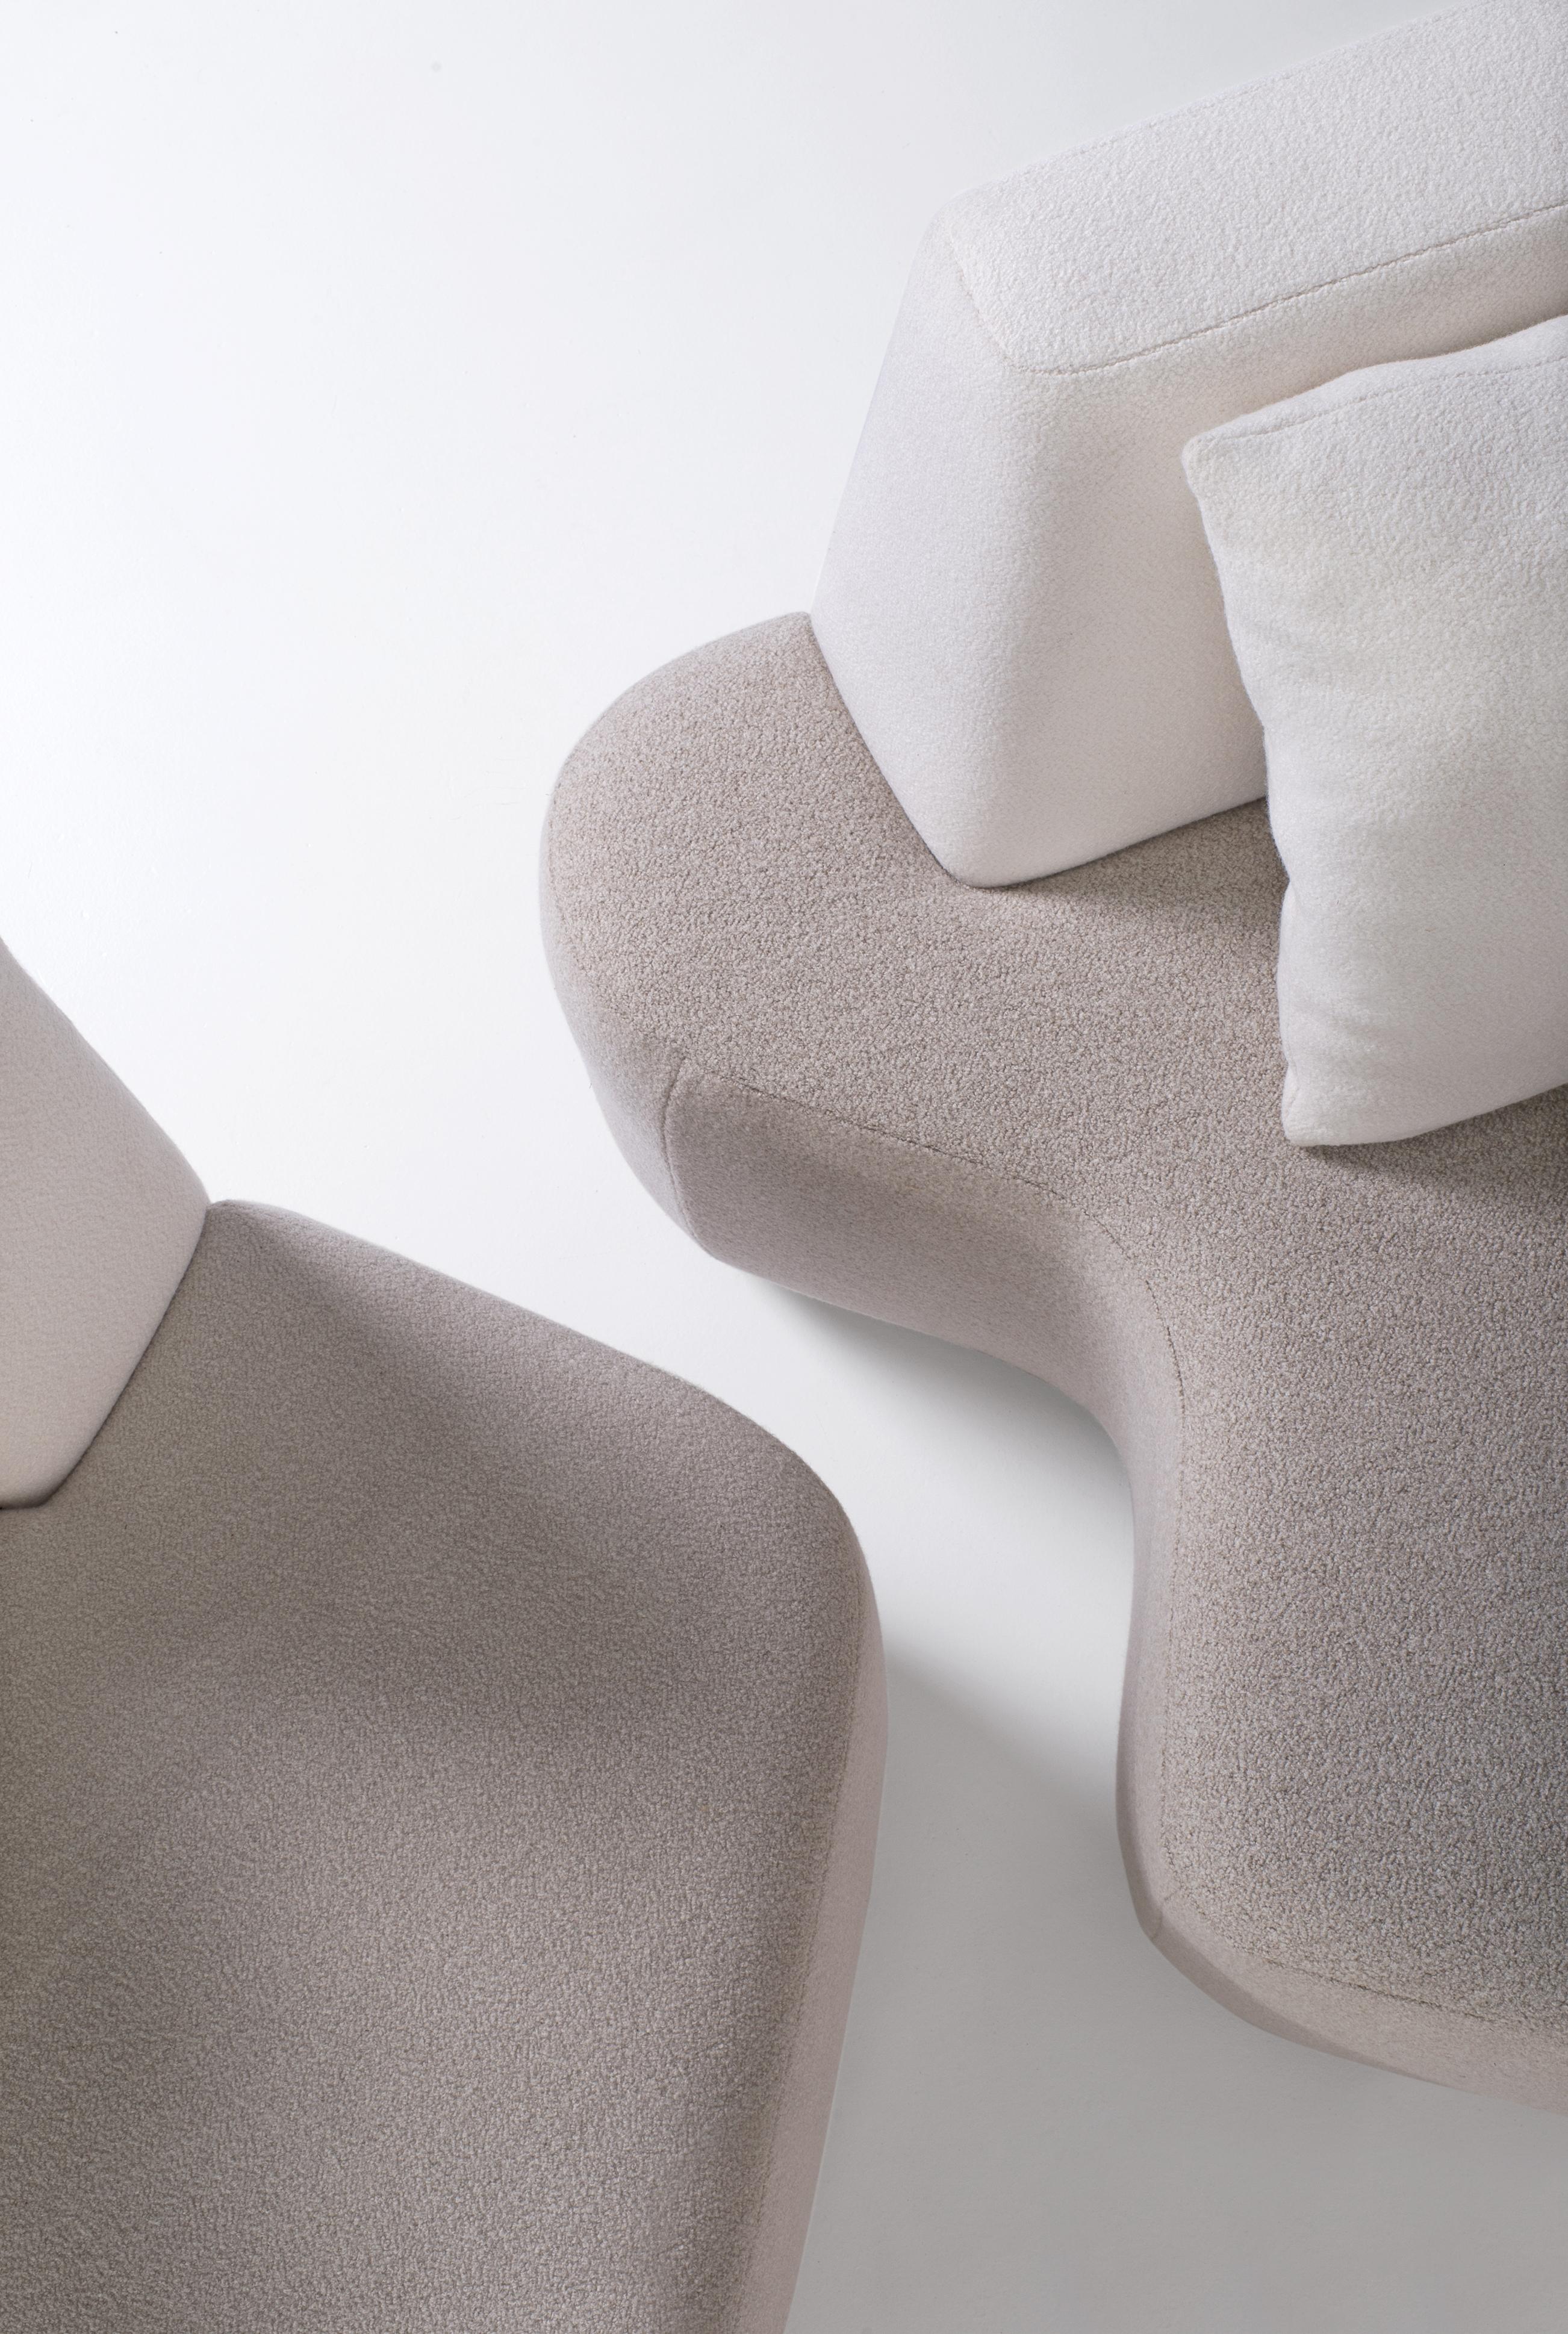 Hand-Crafted Bespoke Organic Sofa in White and Beige Wool Handmade by Eric Gizard in stock